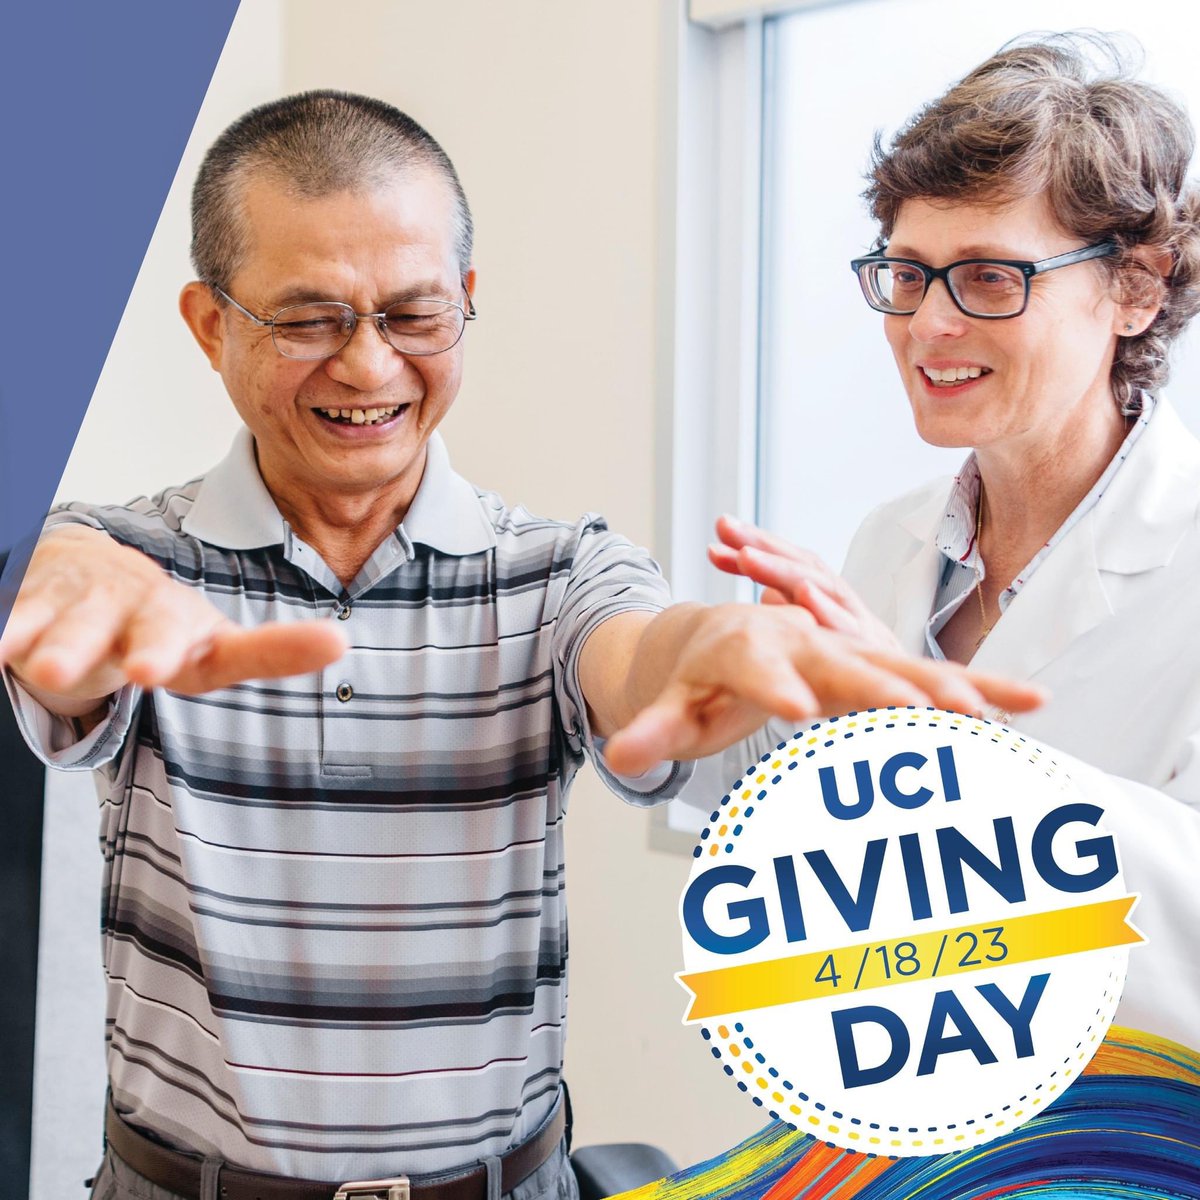 Yesterday, we raised over $674,394 from more than 829 gifts for #UCIHealth on #UCIGivingDay. Thank you to everyone who made this campaign such a success. We are grateful to have you on our team, and we look forward to creating a brilliant future together. #UCIHealthGiving